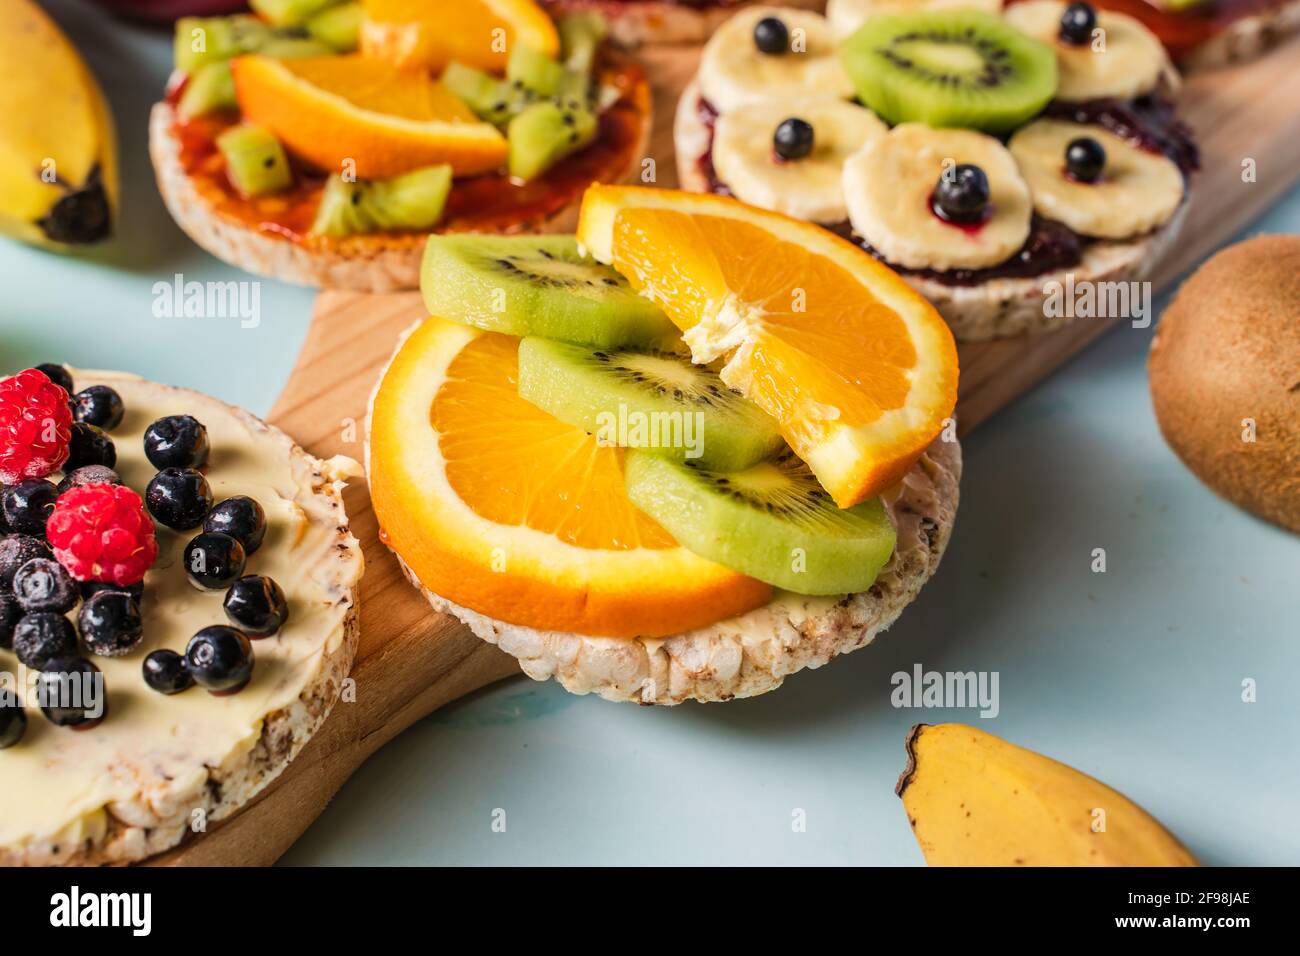 Crispy puffed rice cakes on table with fresh fruit kiwi banana apple blueberries and orange on the table - close up view on healthy organic vegetarian Stock Photo